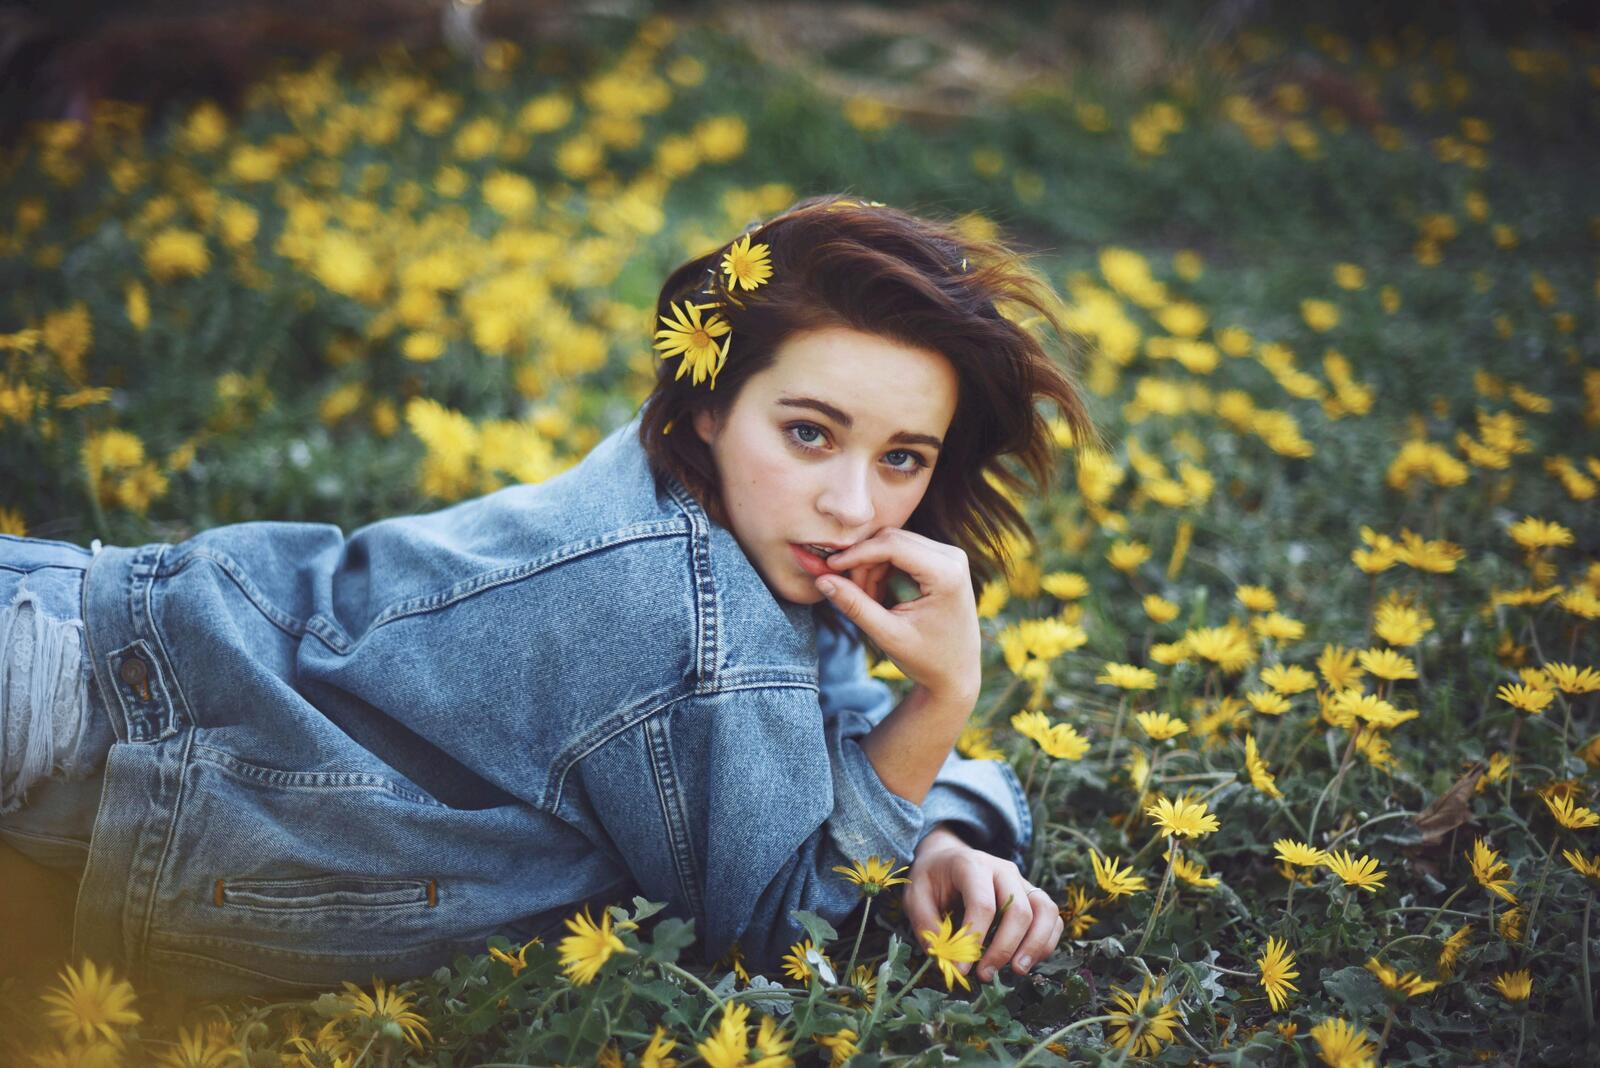 Free photo Kaylee Rae with dandelions in her hair lying in a clearing